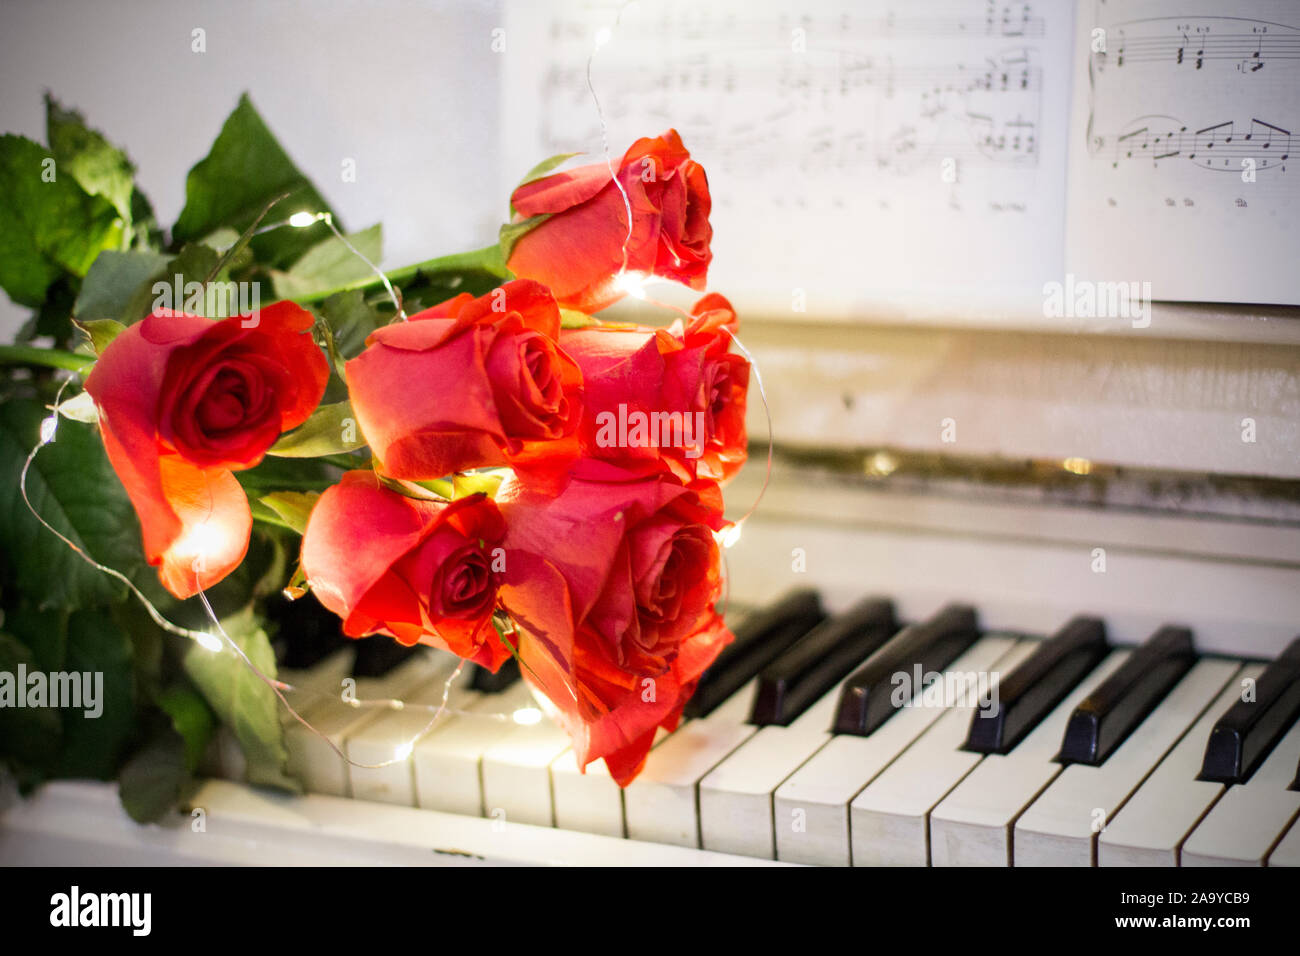 Red roses on a white piano with notes and garlands Stock Photo - Alamy